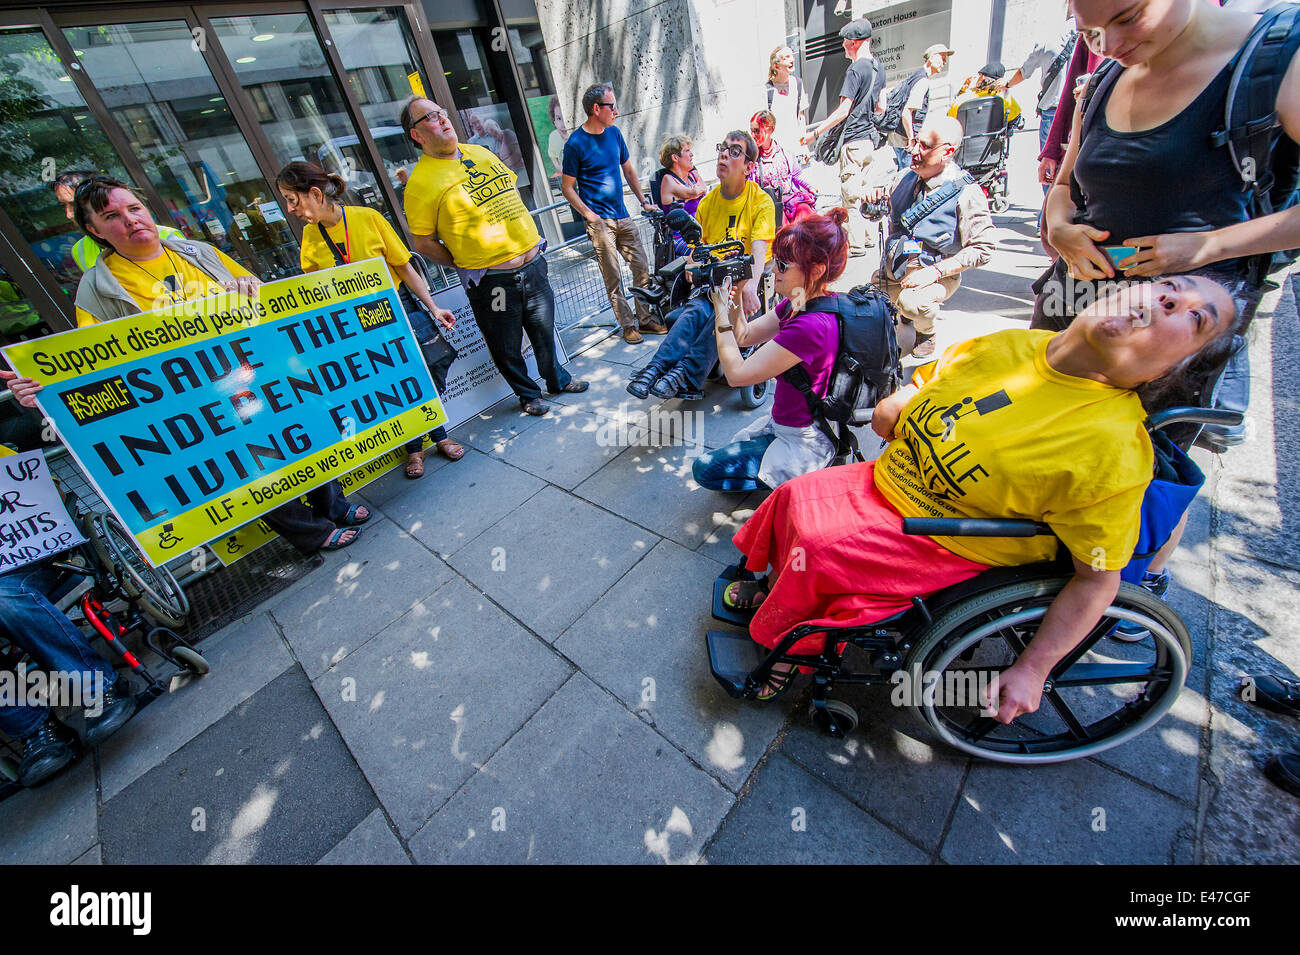 London, UK. 04th July, 2014. DPAC organise a protest outside the Department of Work and Pensions to demand that they save the Independent Living Fund. There is a heavy police presence in the background, after the Abbey closure at the weekend, but the liaison officers are very friendly. Westminster, London, UK 04 July 2014. Credit:  Guy Bell/Alamy Live News Stock Photo